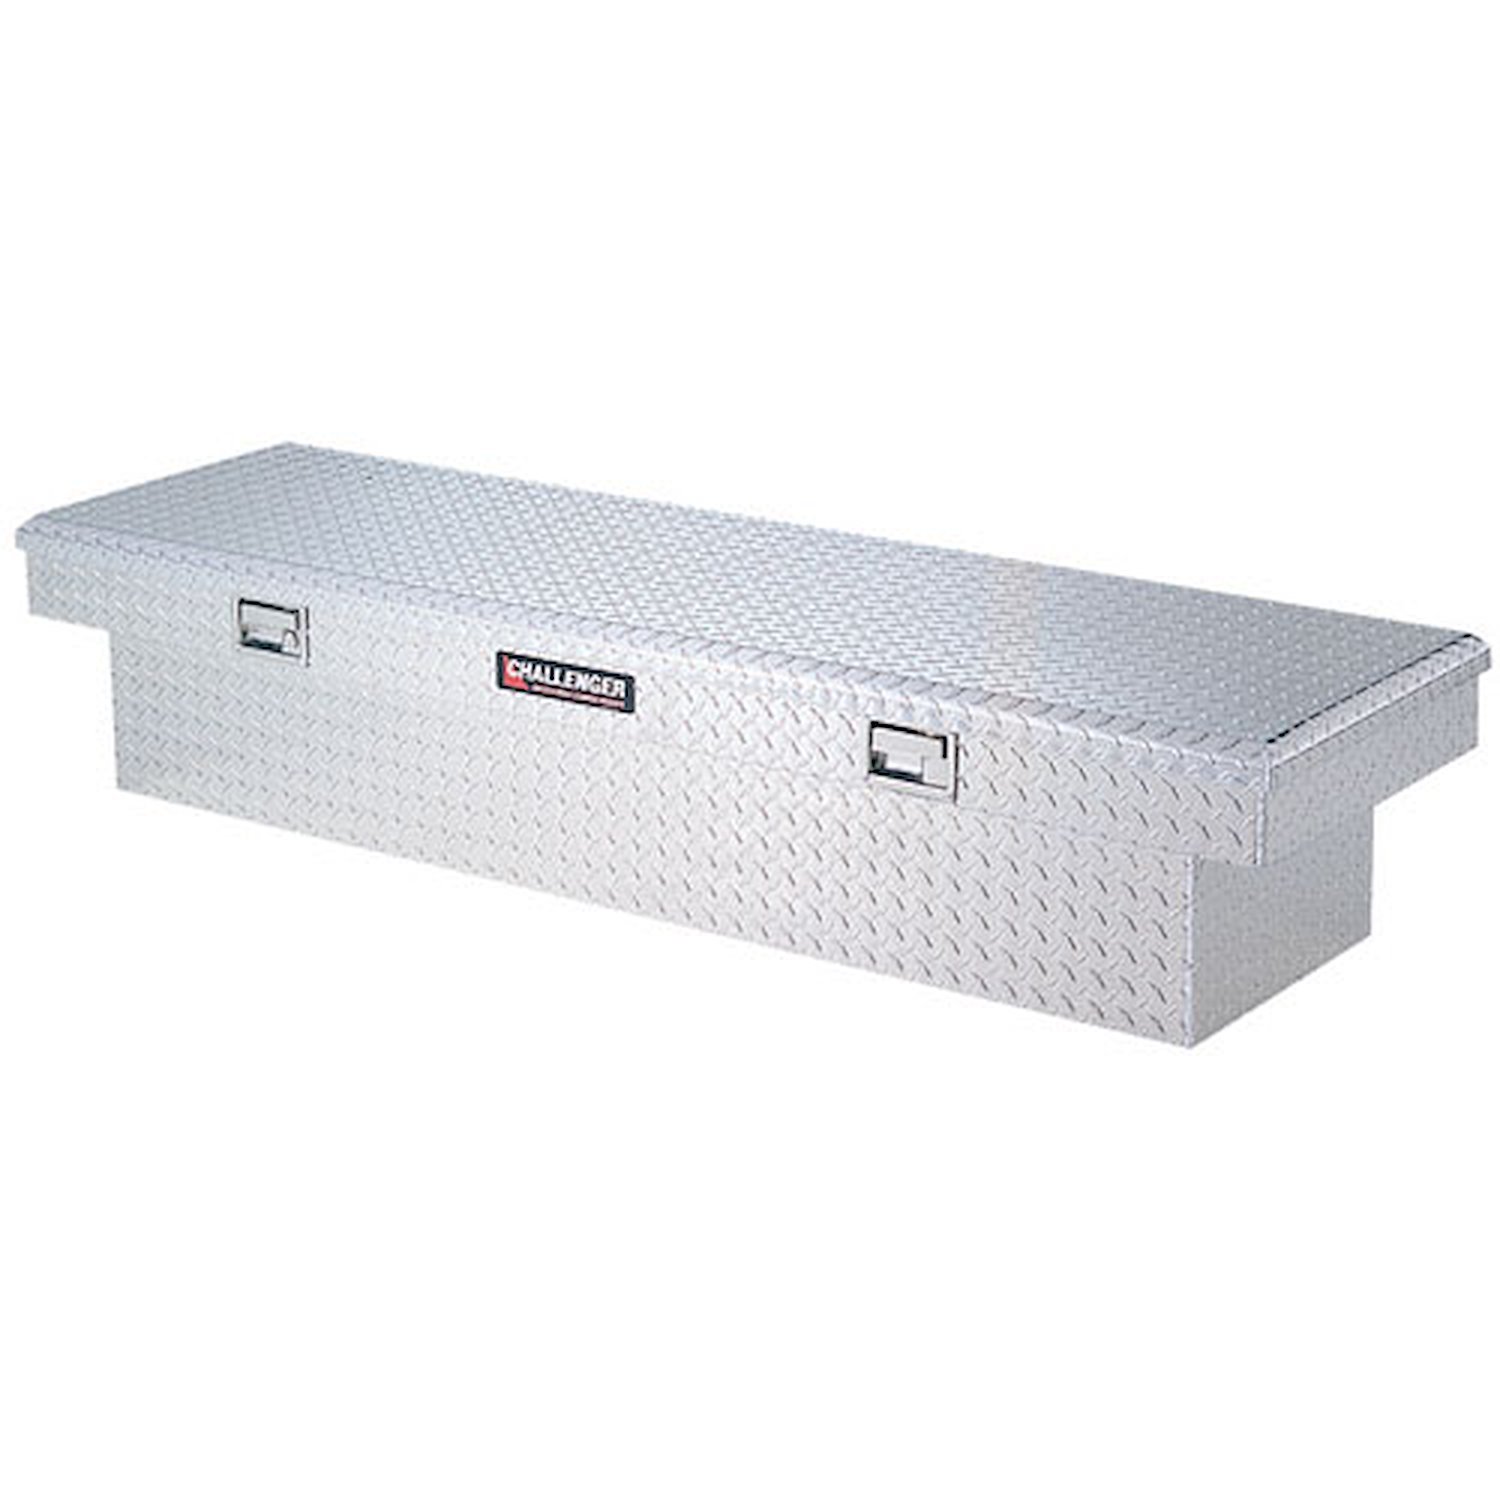 Truck Bed Challenger Tool Box Length: 73.75"